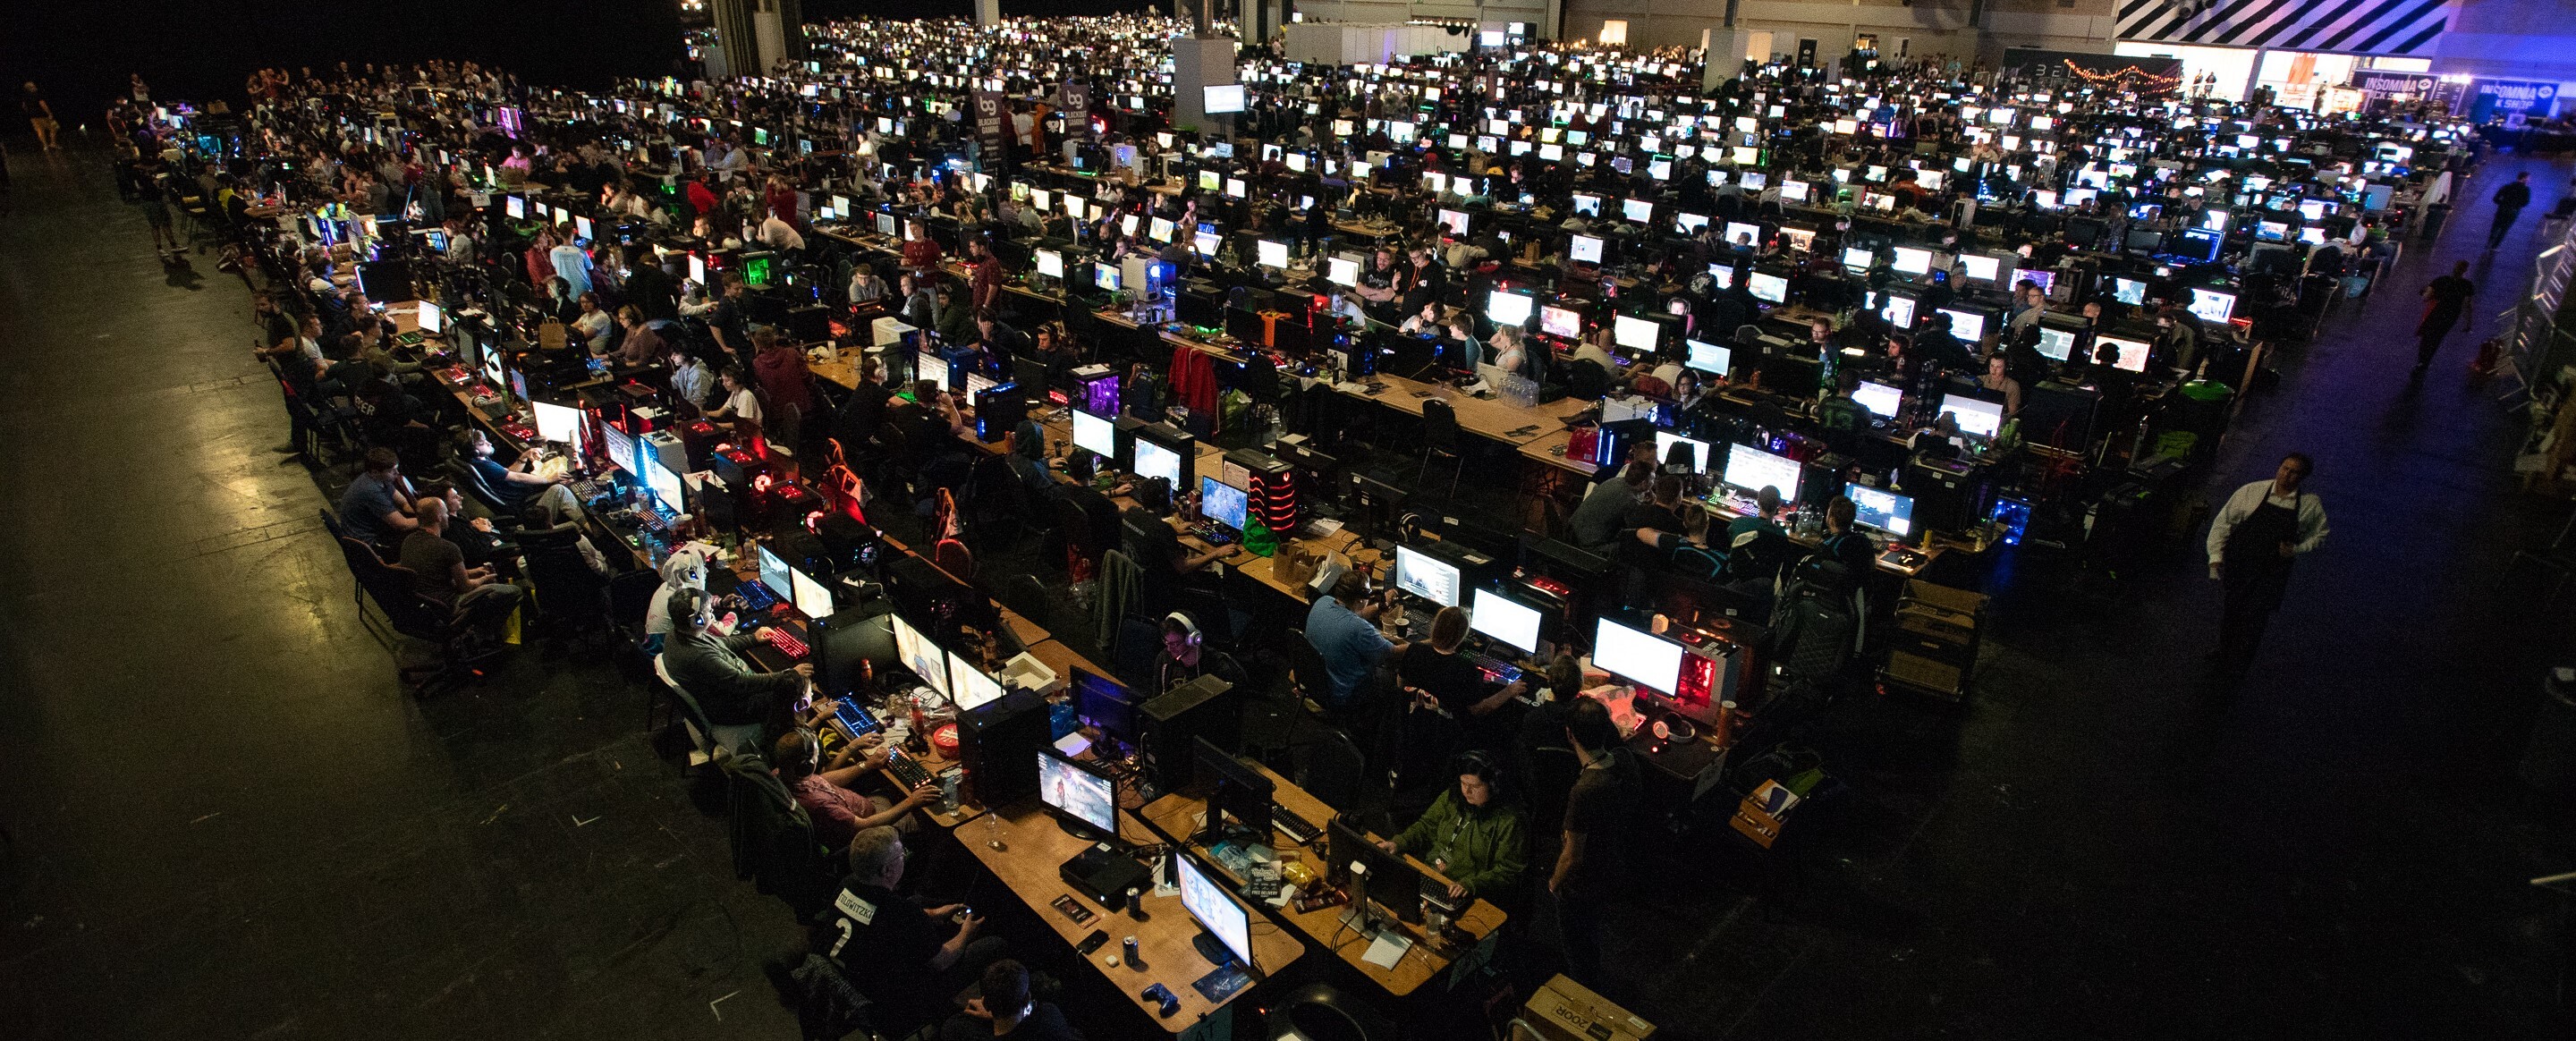 An overhead view of a full LAN hall